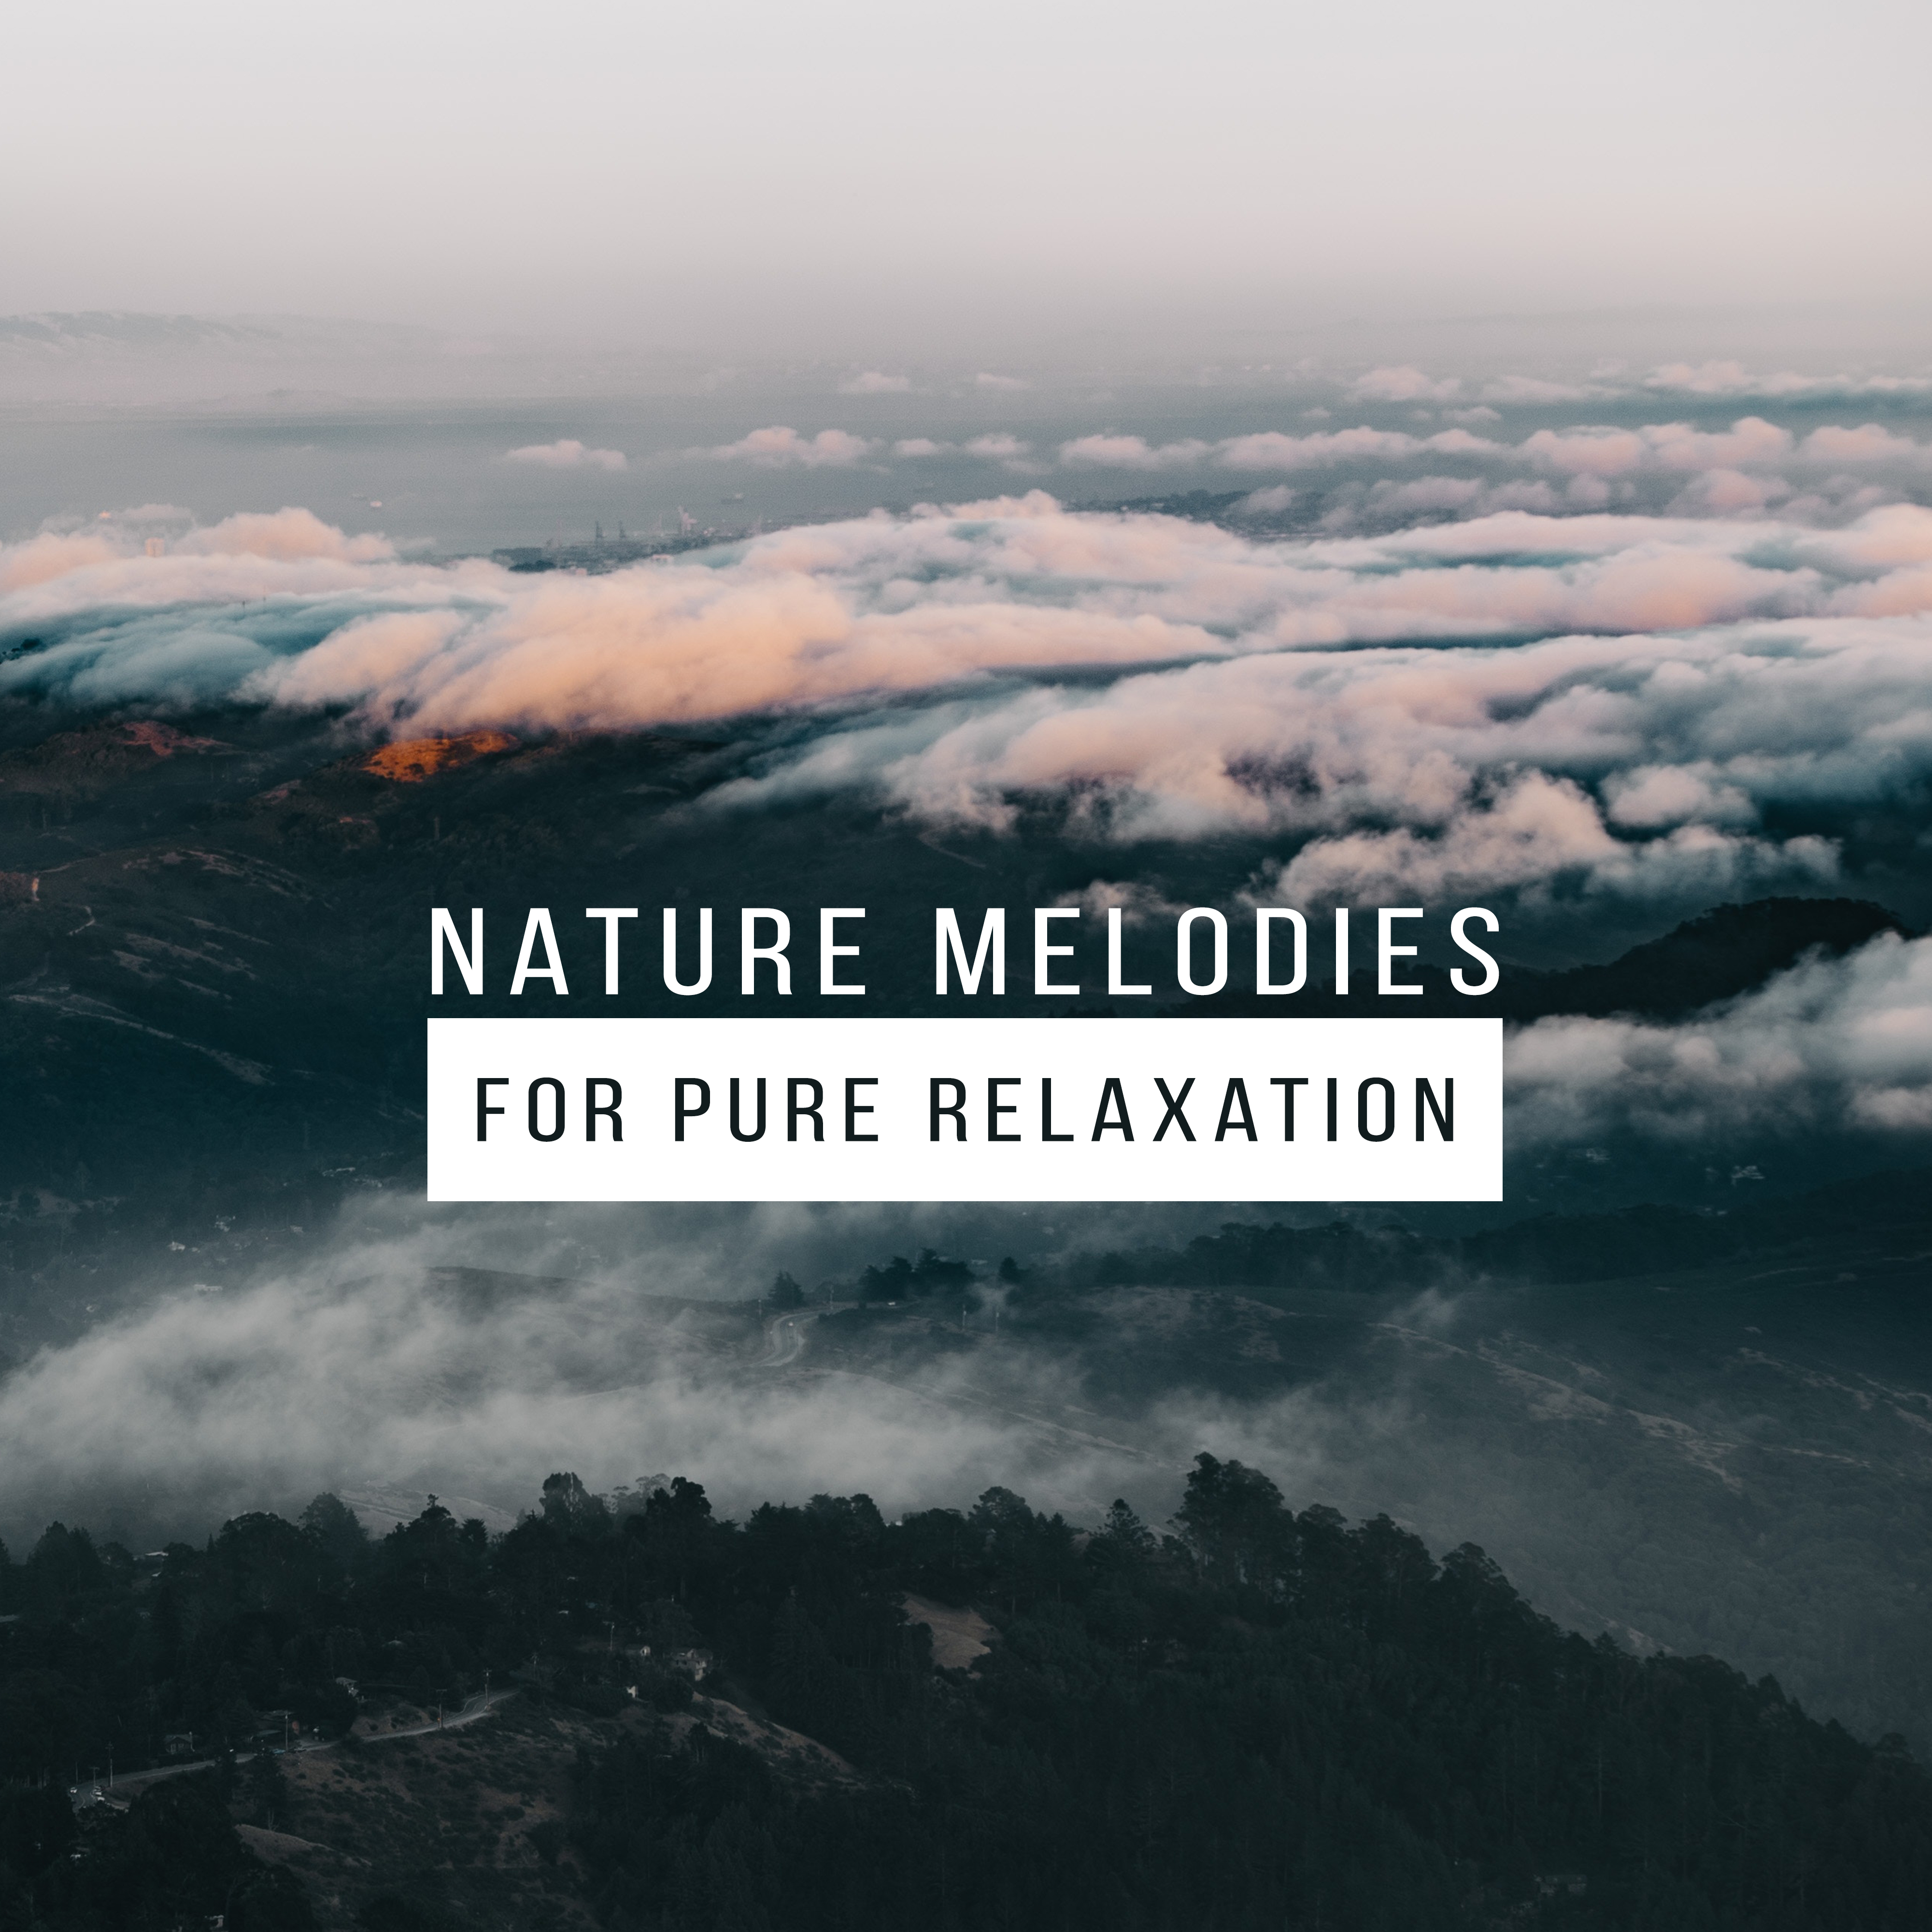 Nature Melodies for Pure Relaxation